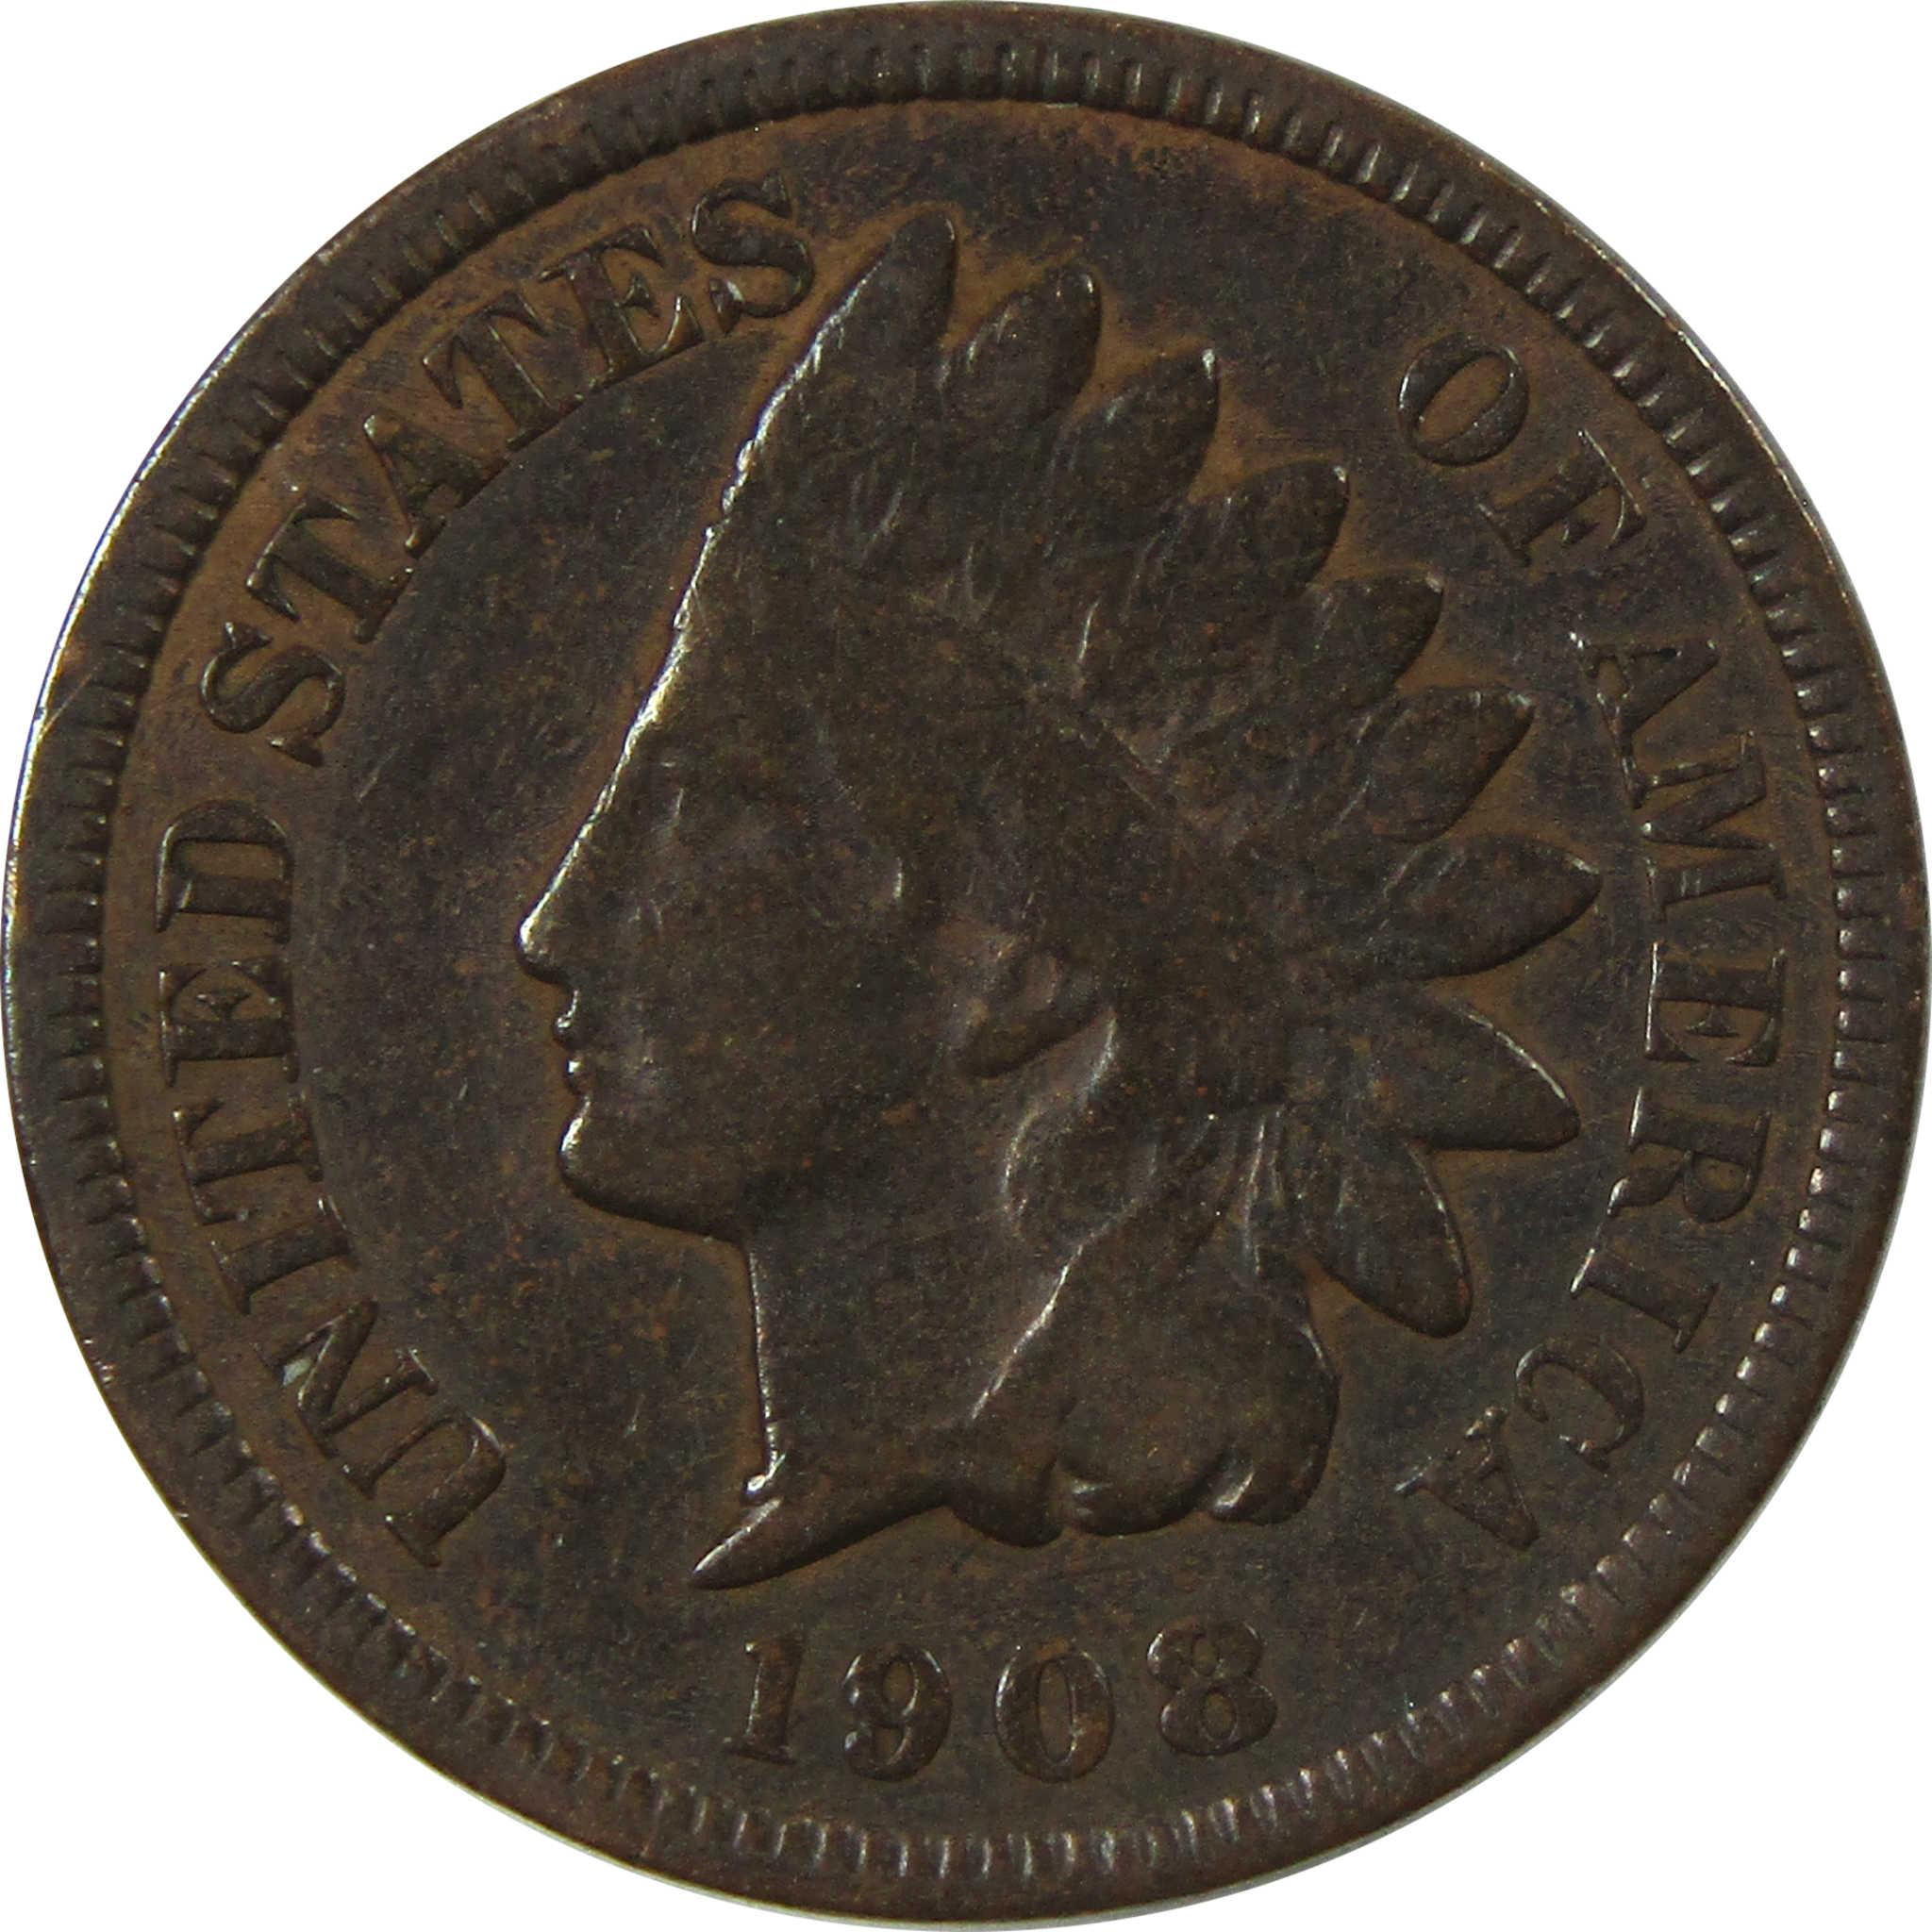 1908 S Indian Head Cent VG Very Good Details Penny 1c Coin SKU:I13654